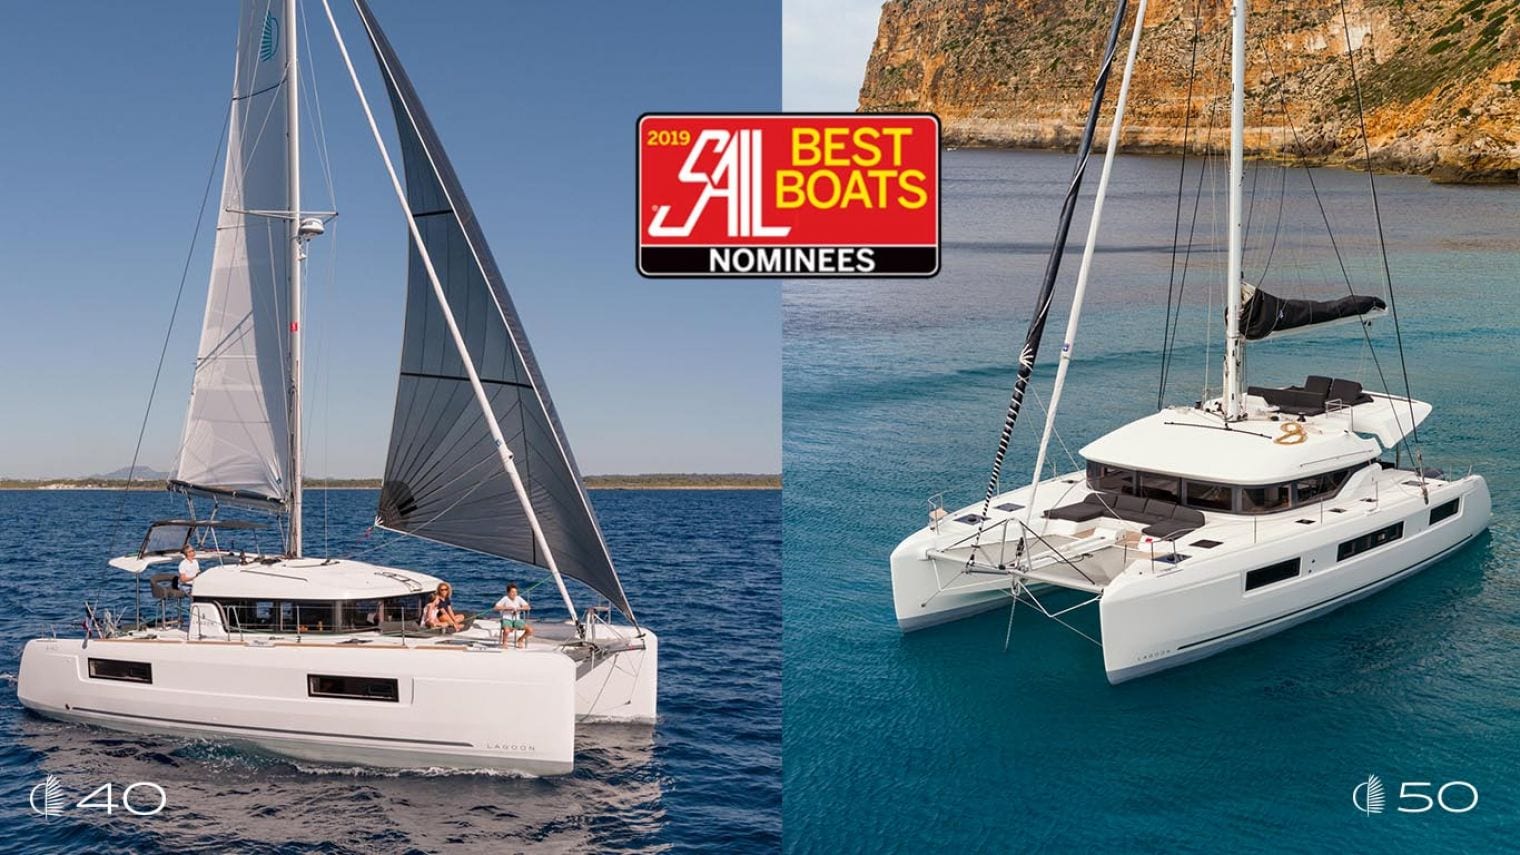 Lagoon 40 and 50 Nominated for SAIL Magazine’s ‘Best Boats 2019’ Award